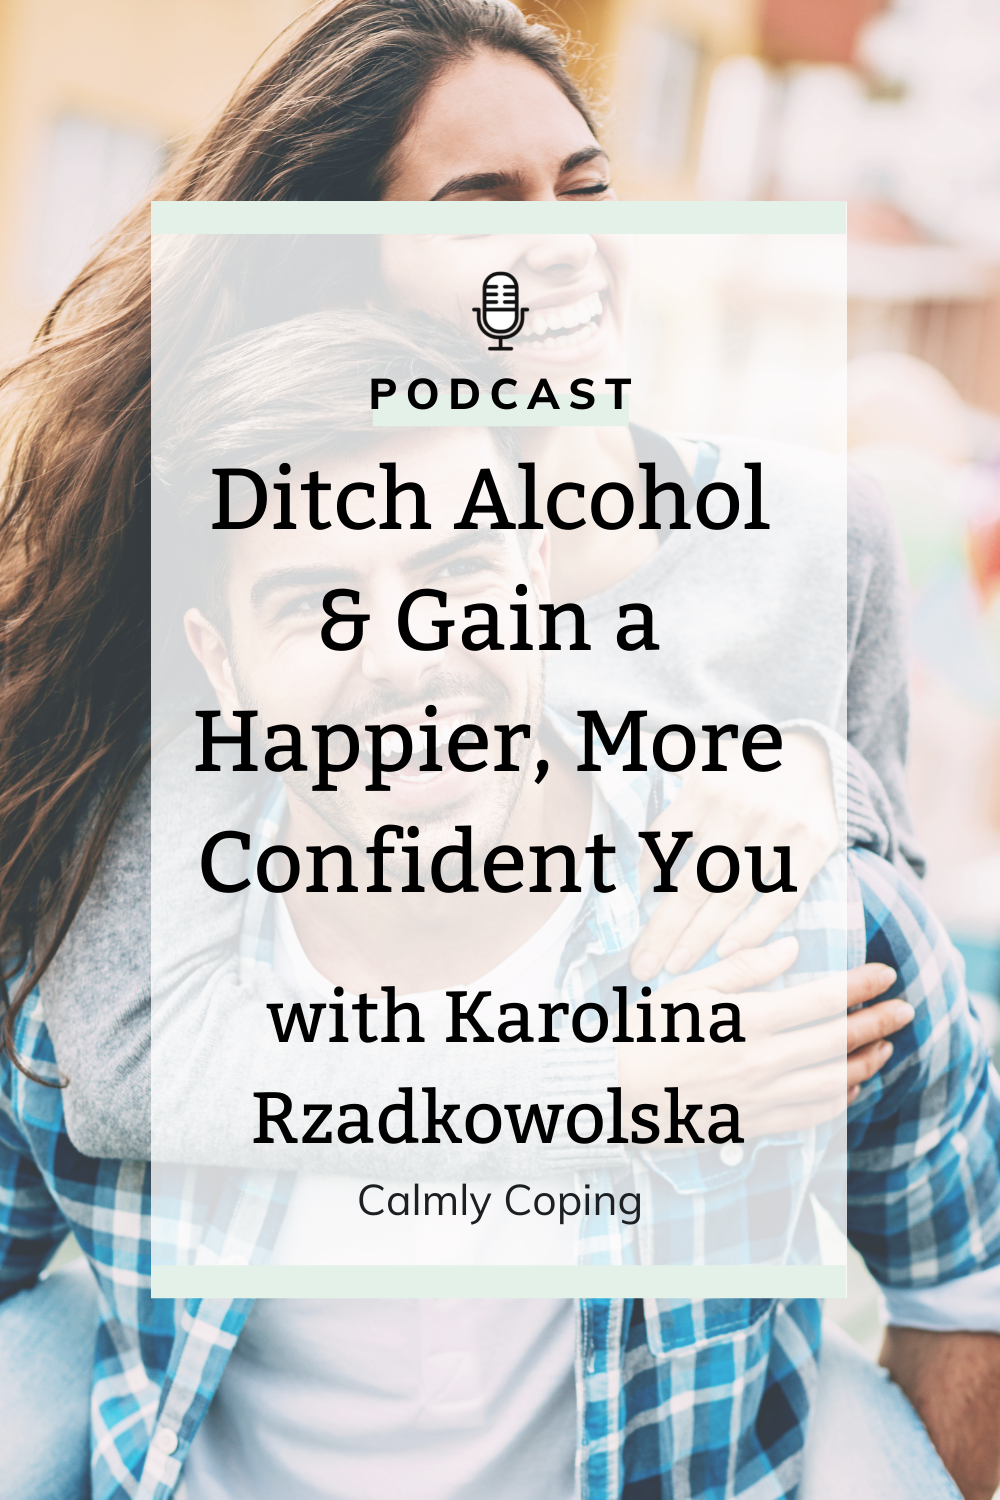 Ditch Alcohol and Gain a Happier, More Confident You